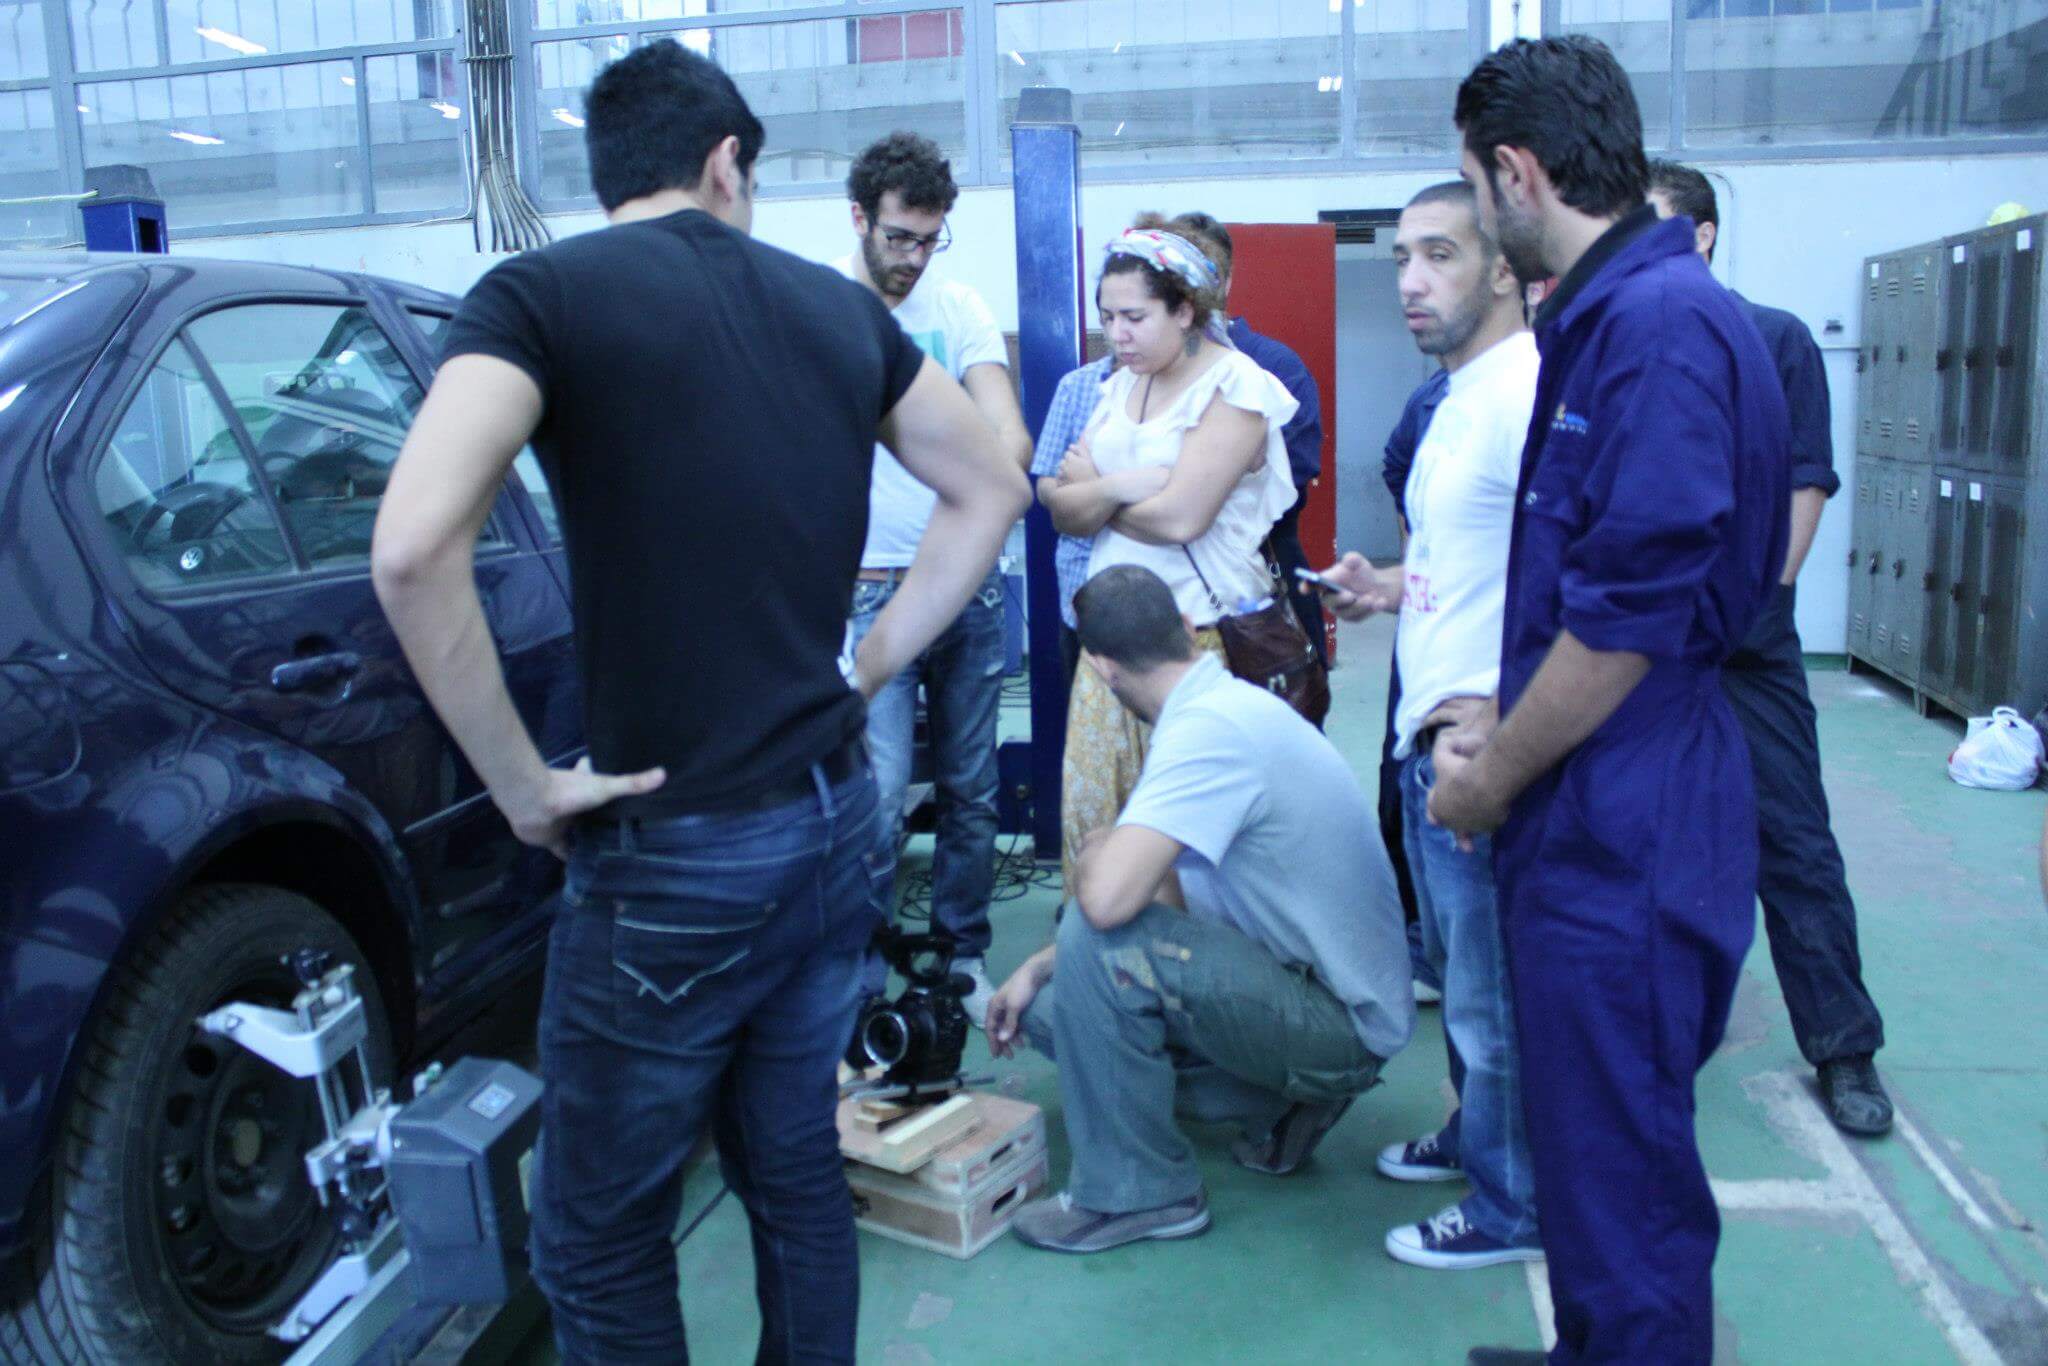 A group of people standing next to a car. Color photograph.